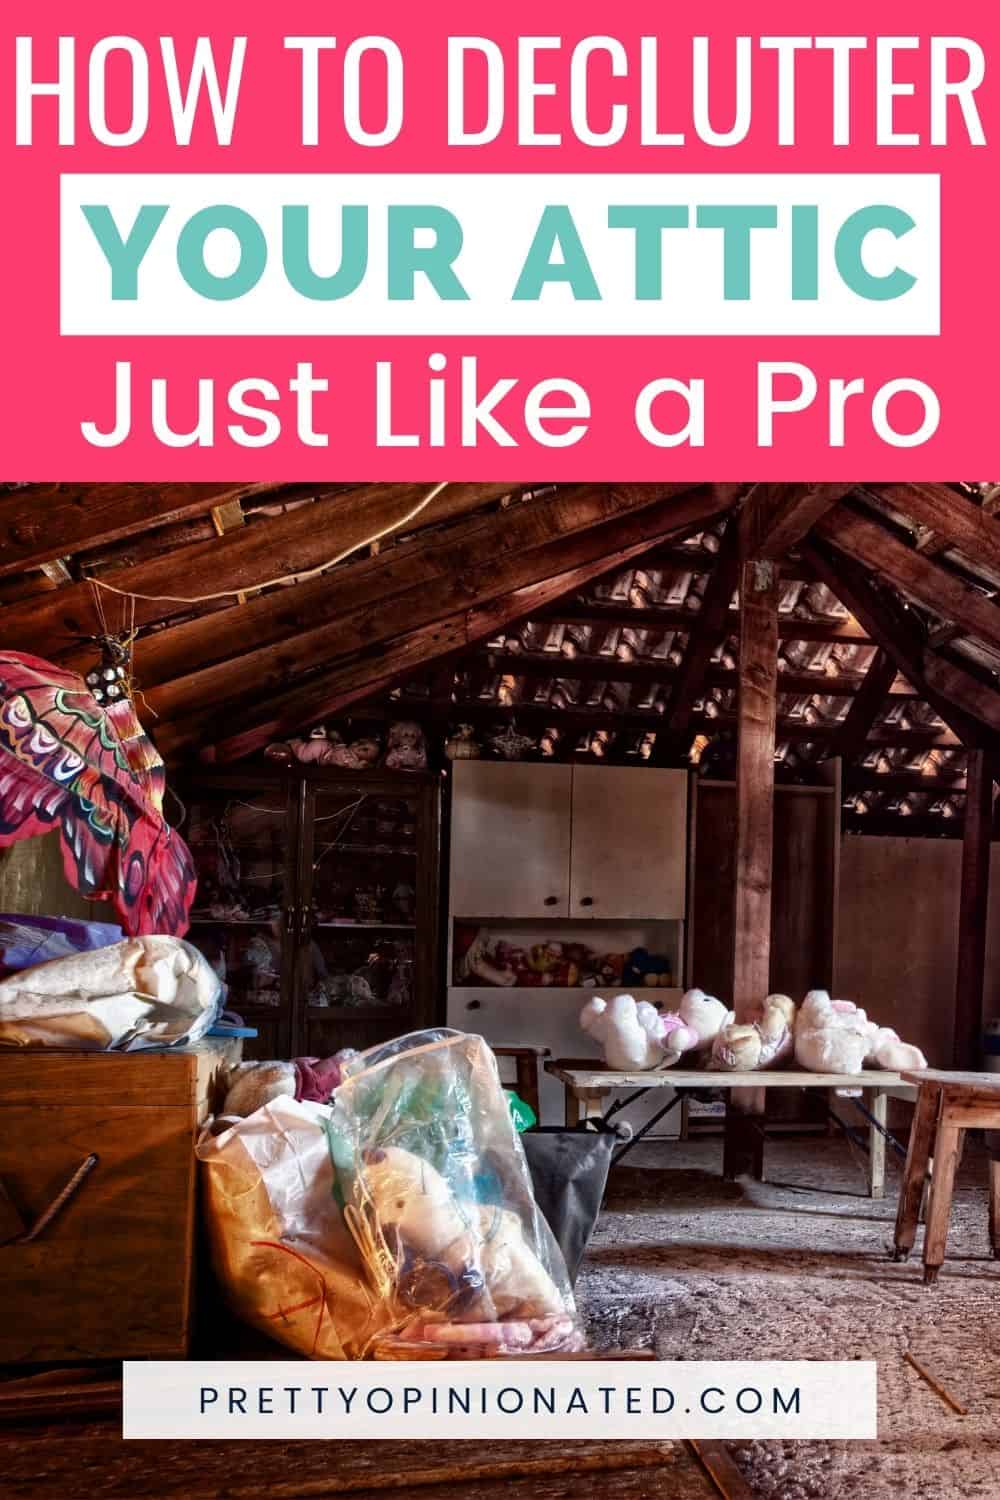 Decluttering Your Attic 101: Here's How to Do it Like a Pro